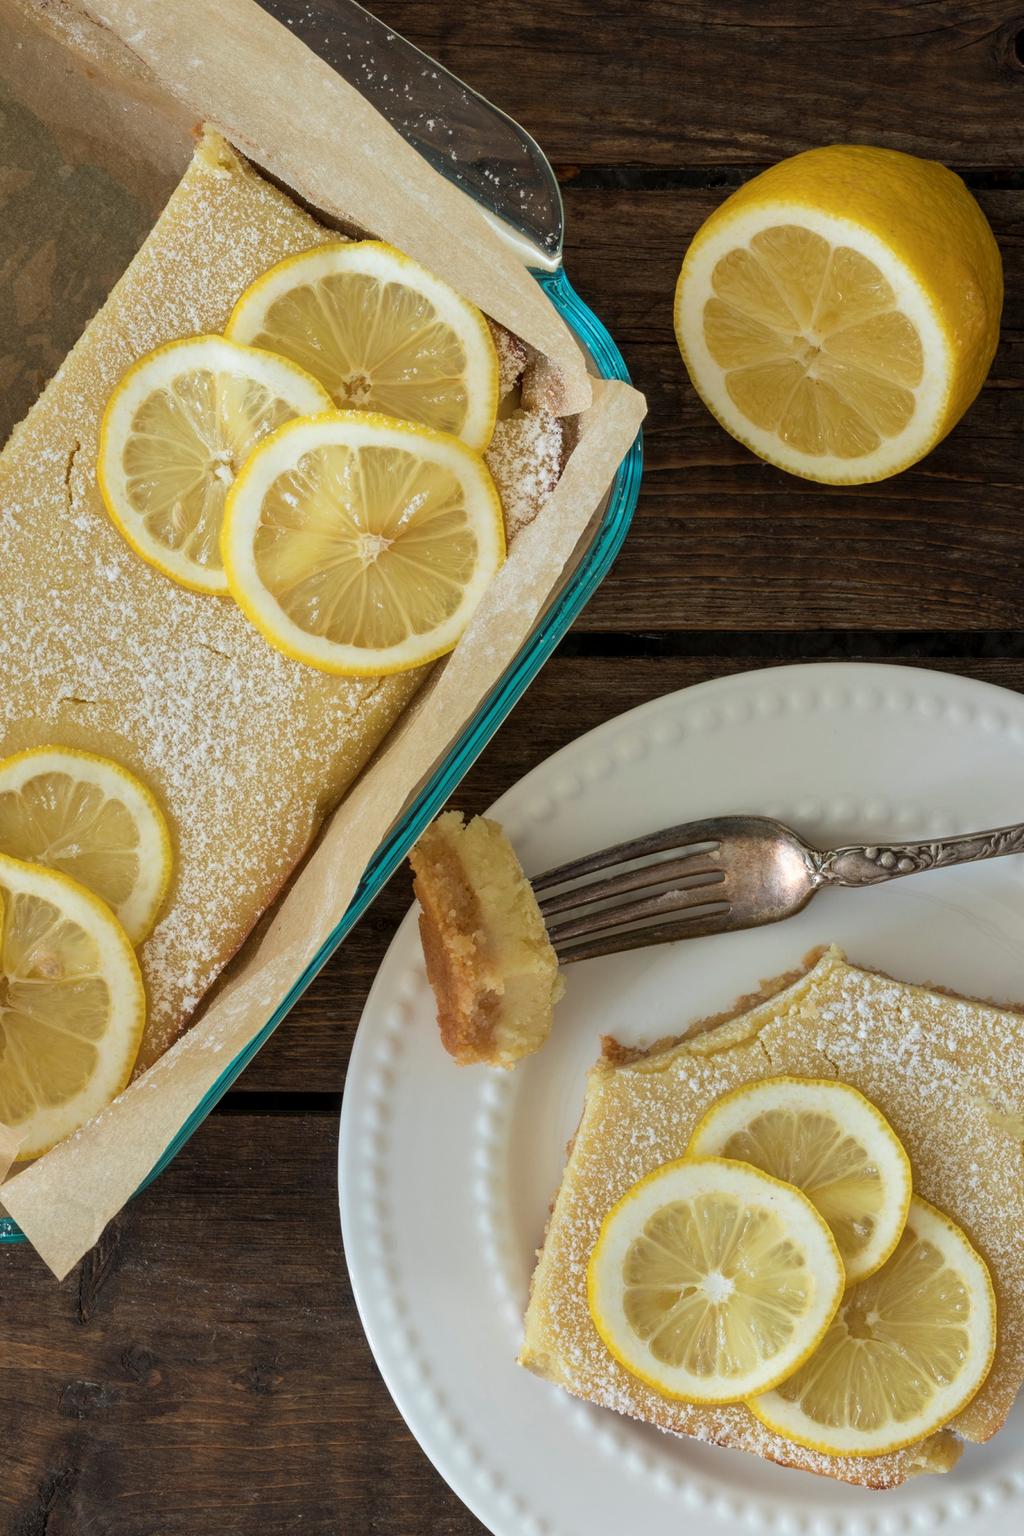 Lemon Dream Bars You and your guests will be left satisfied after these dense, wonderful lemon dream bars! Finish them off with lemon and a sprinkle of erythritol.